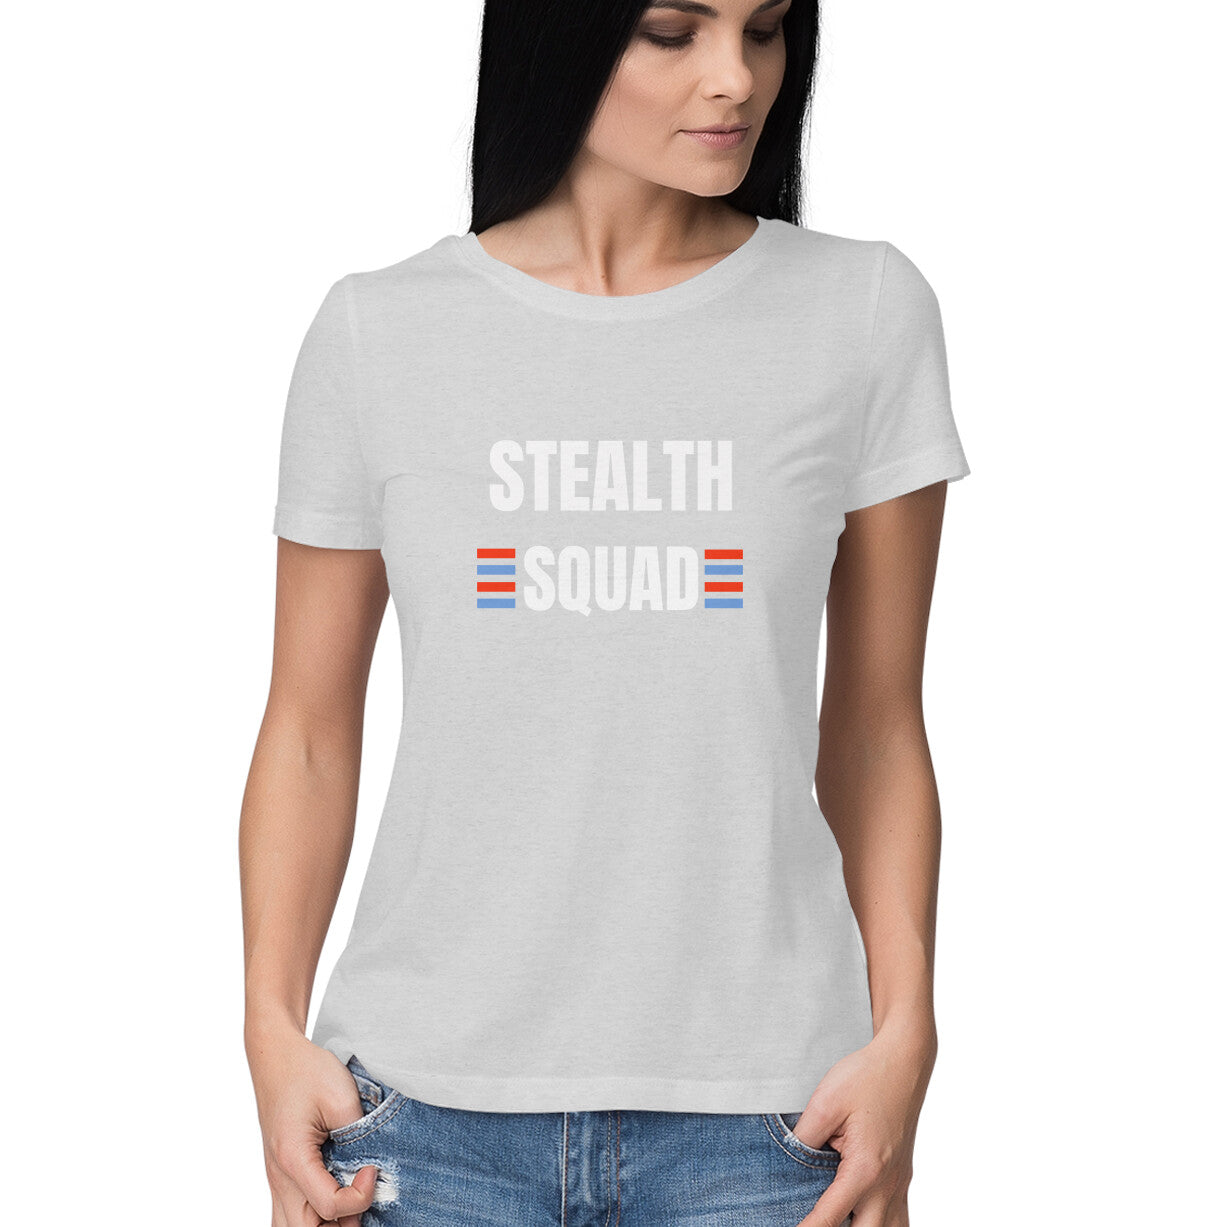 Stealth squad Women's tee